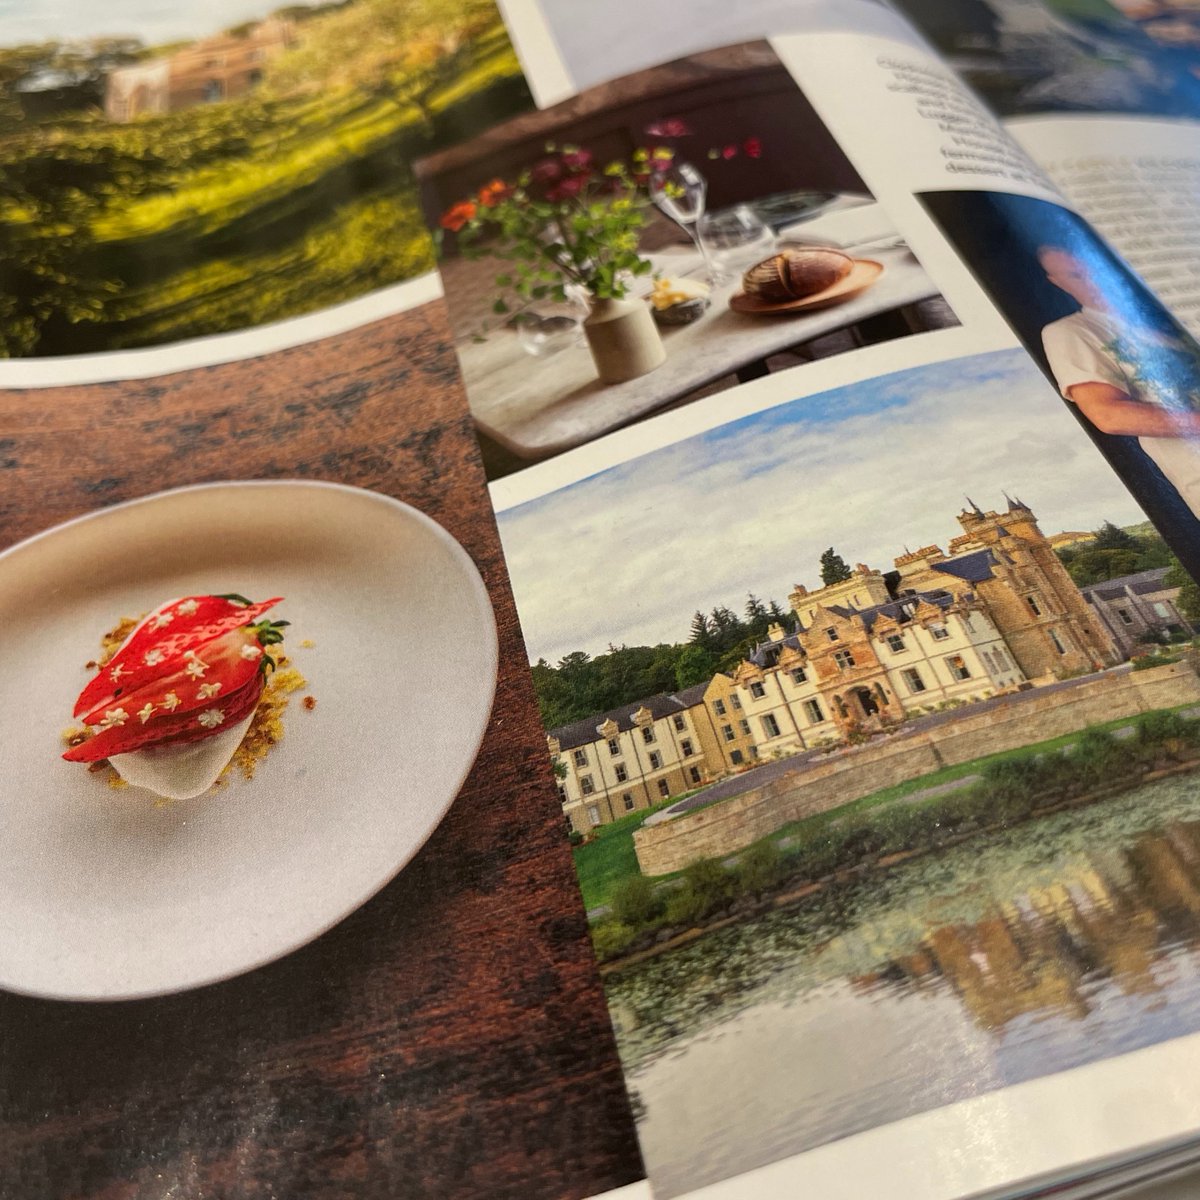 We're delighted that Tamburinni & Wishart feature in the January issue of Conde Nast Traveller. 'The three-course lunchtime tasting menu is exemplary; carmelised scallops, a whimsical but irresistible onion tarte tatin' Experience the exquisite cuisine: bit.ly/2YTEaXf